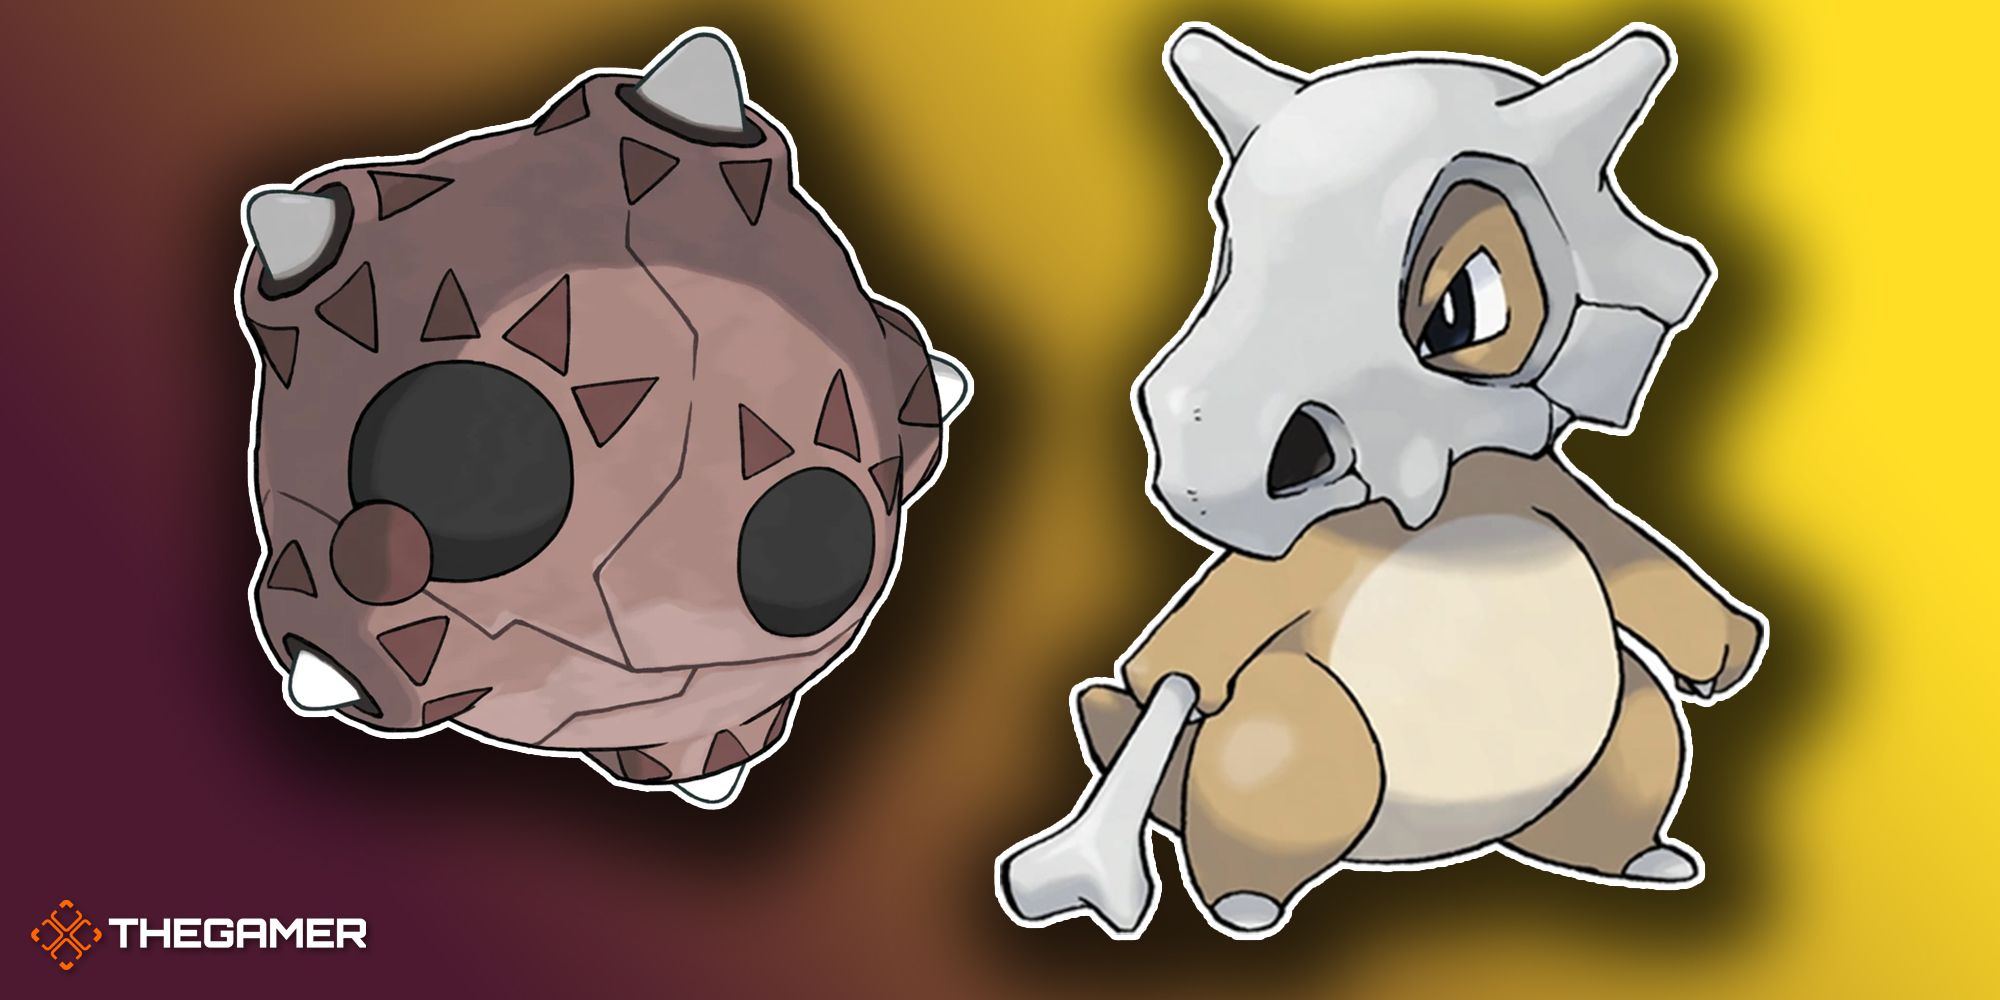 Art of the Pokemon Minior and Cubone from the anime series